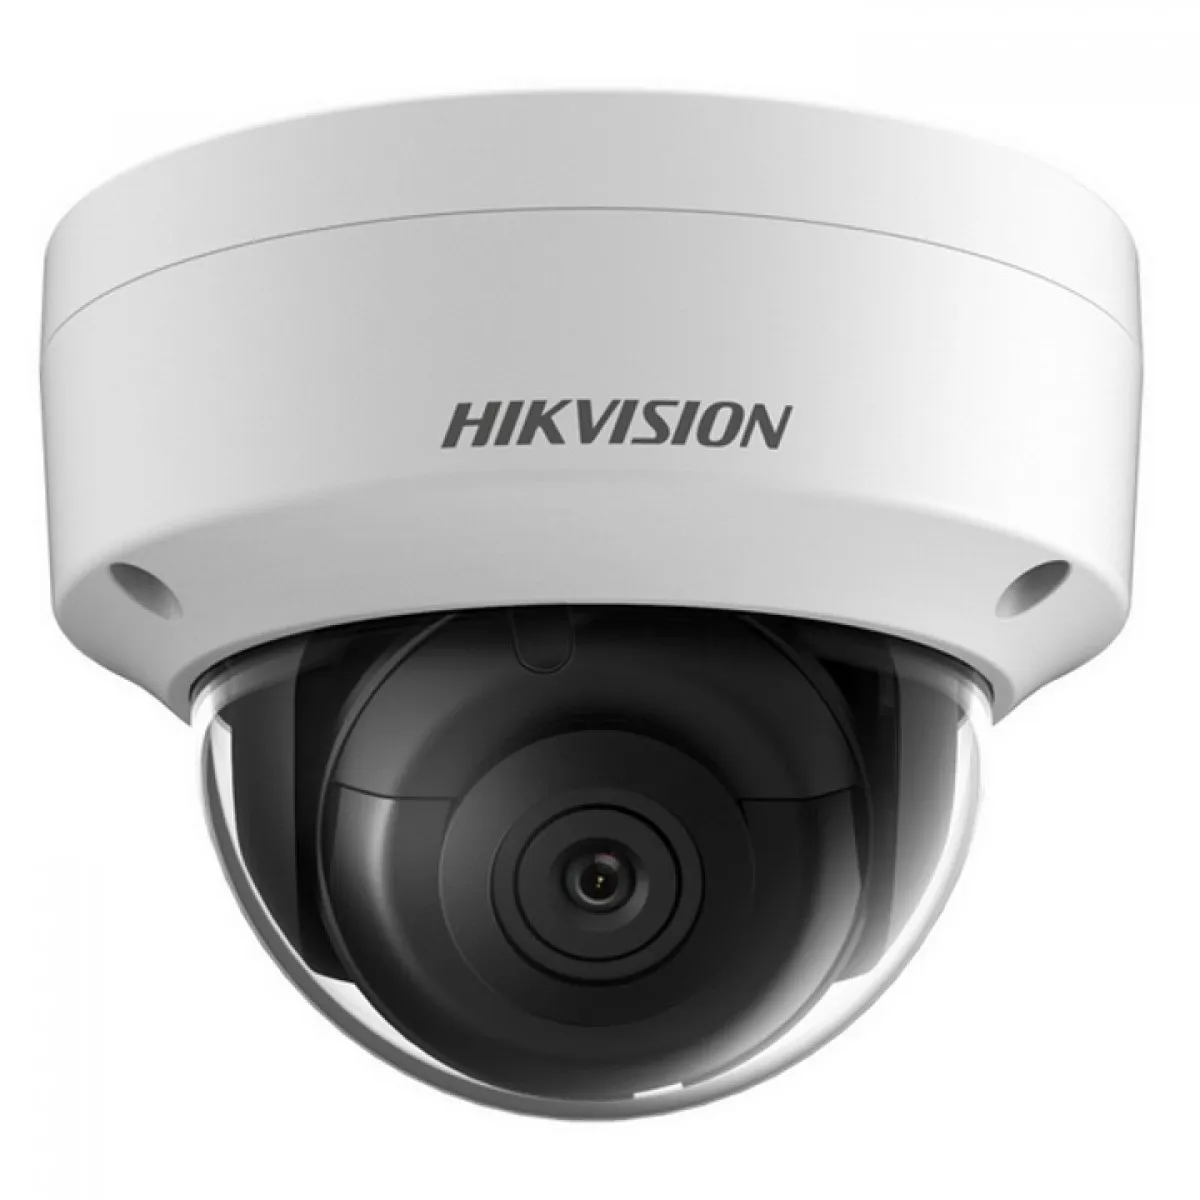 HIKVISION DS-2CD1123G0-I Dome IP Camera - Pavan Computers ...